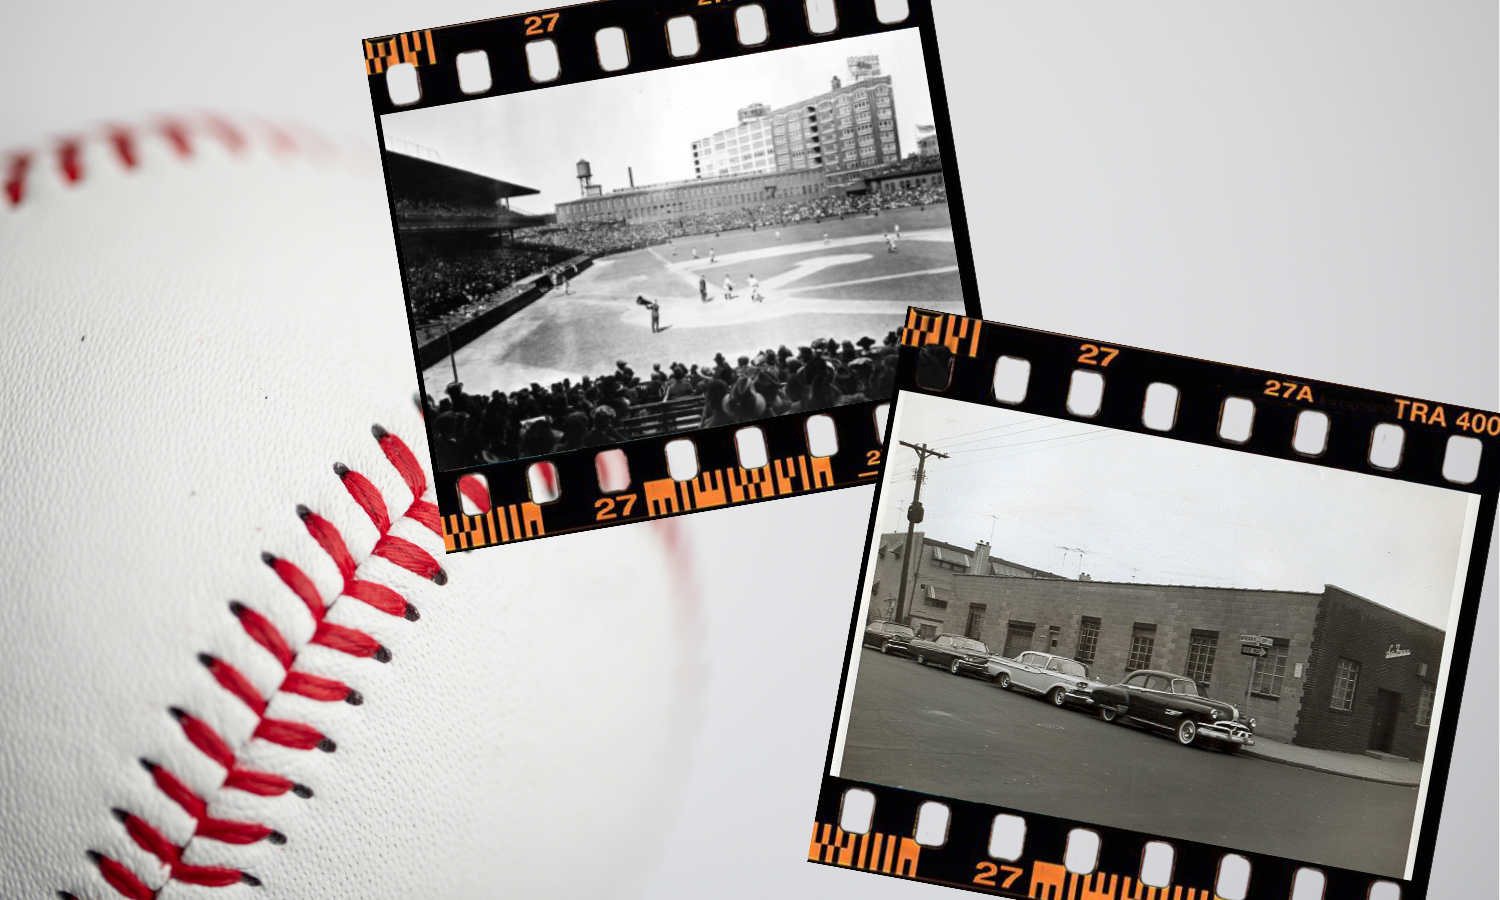 faded baseball in background, 2 vintage photos overlaid. 1 of the philadelphia phillies stadium from the early 1900s and the other of LaFrance's building on McKean Street